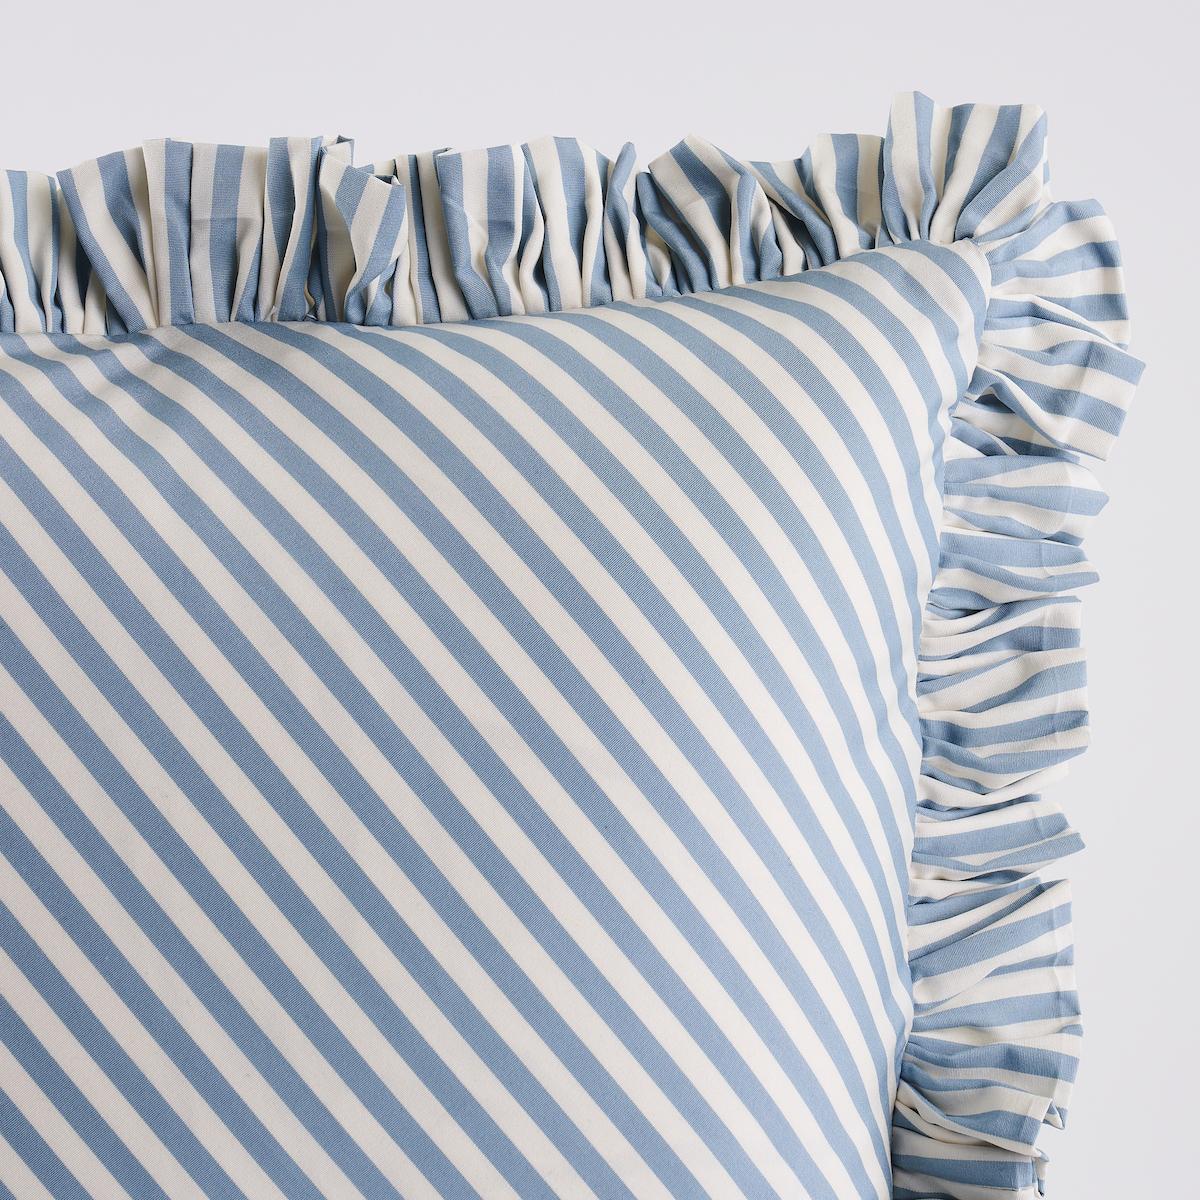 This pillow features Brigitte Stripe with a 1.5